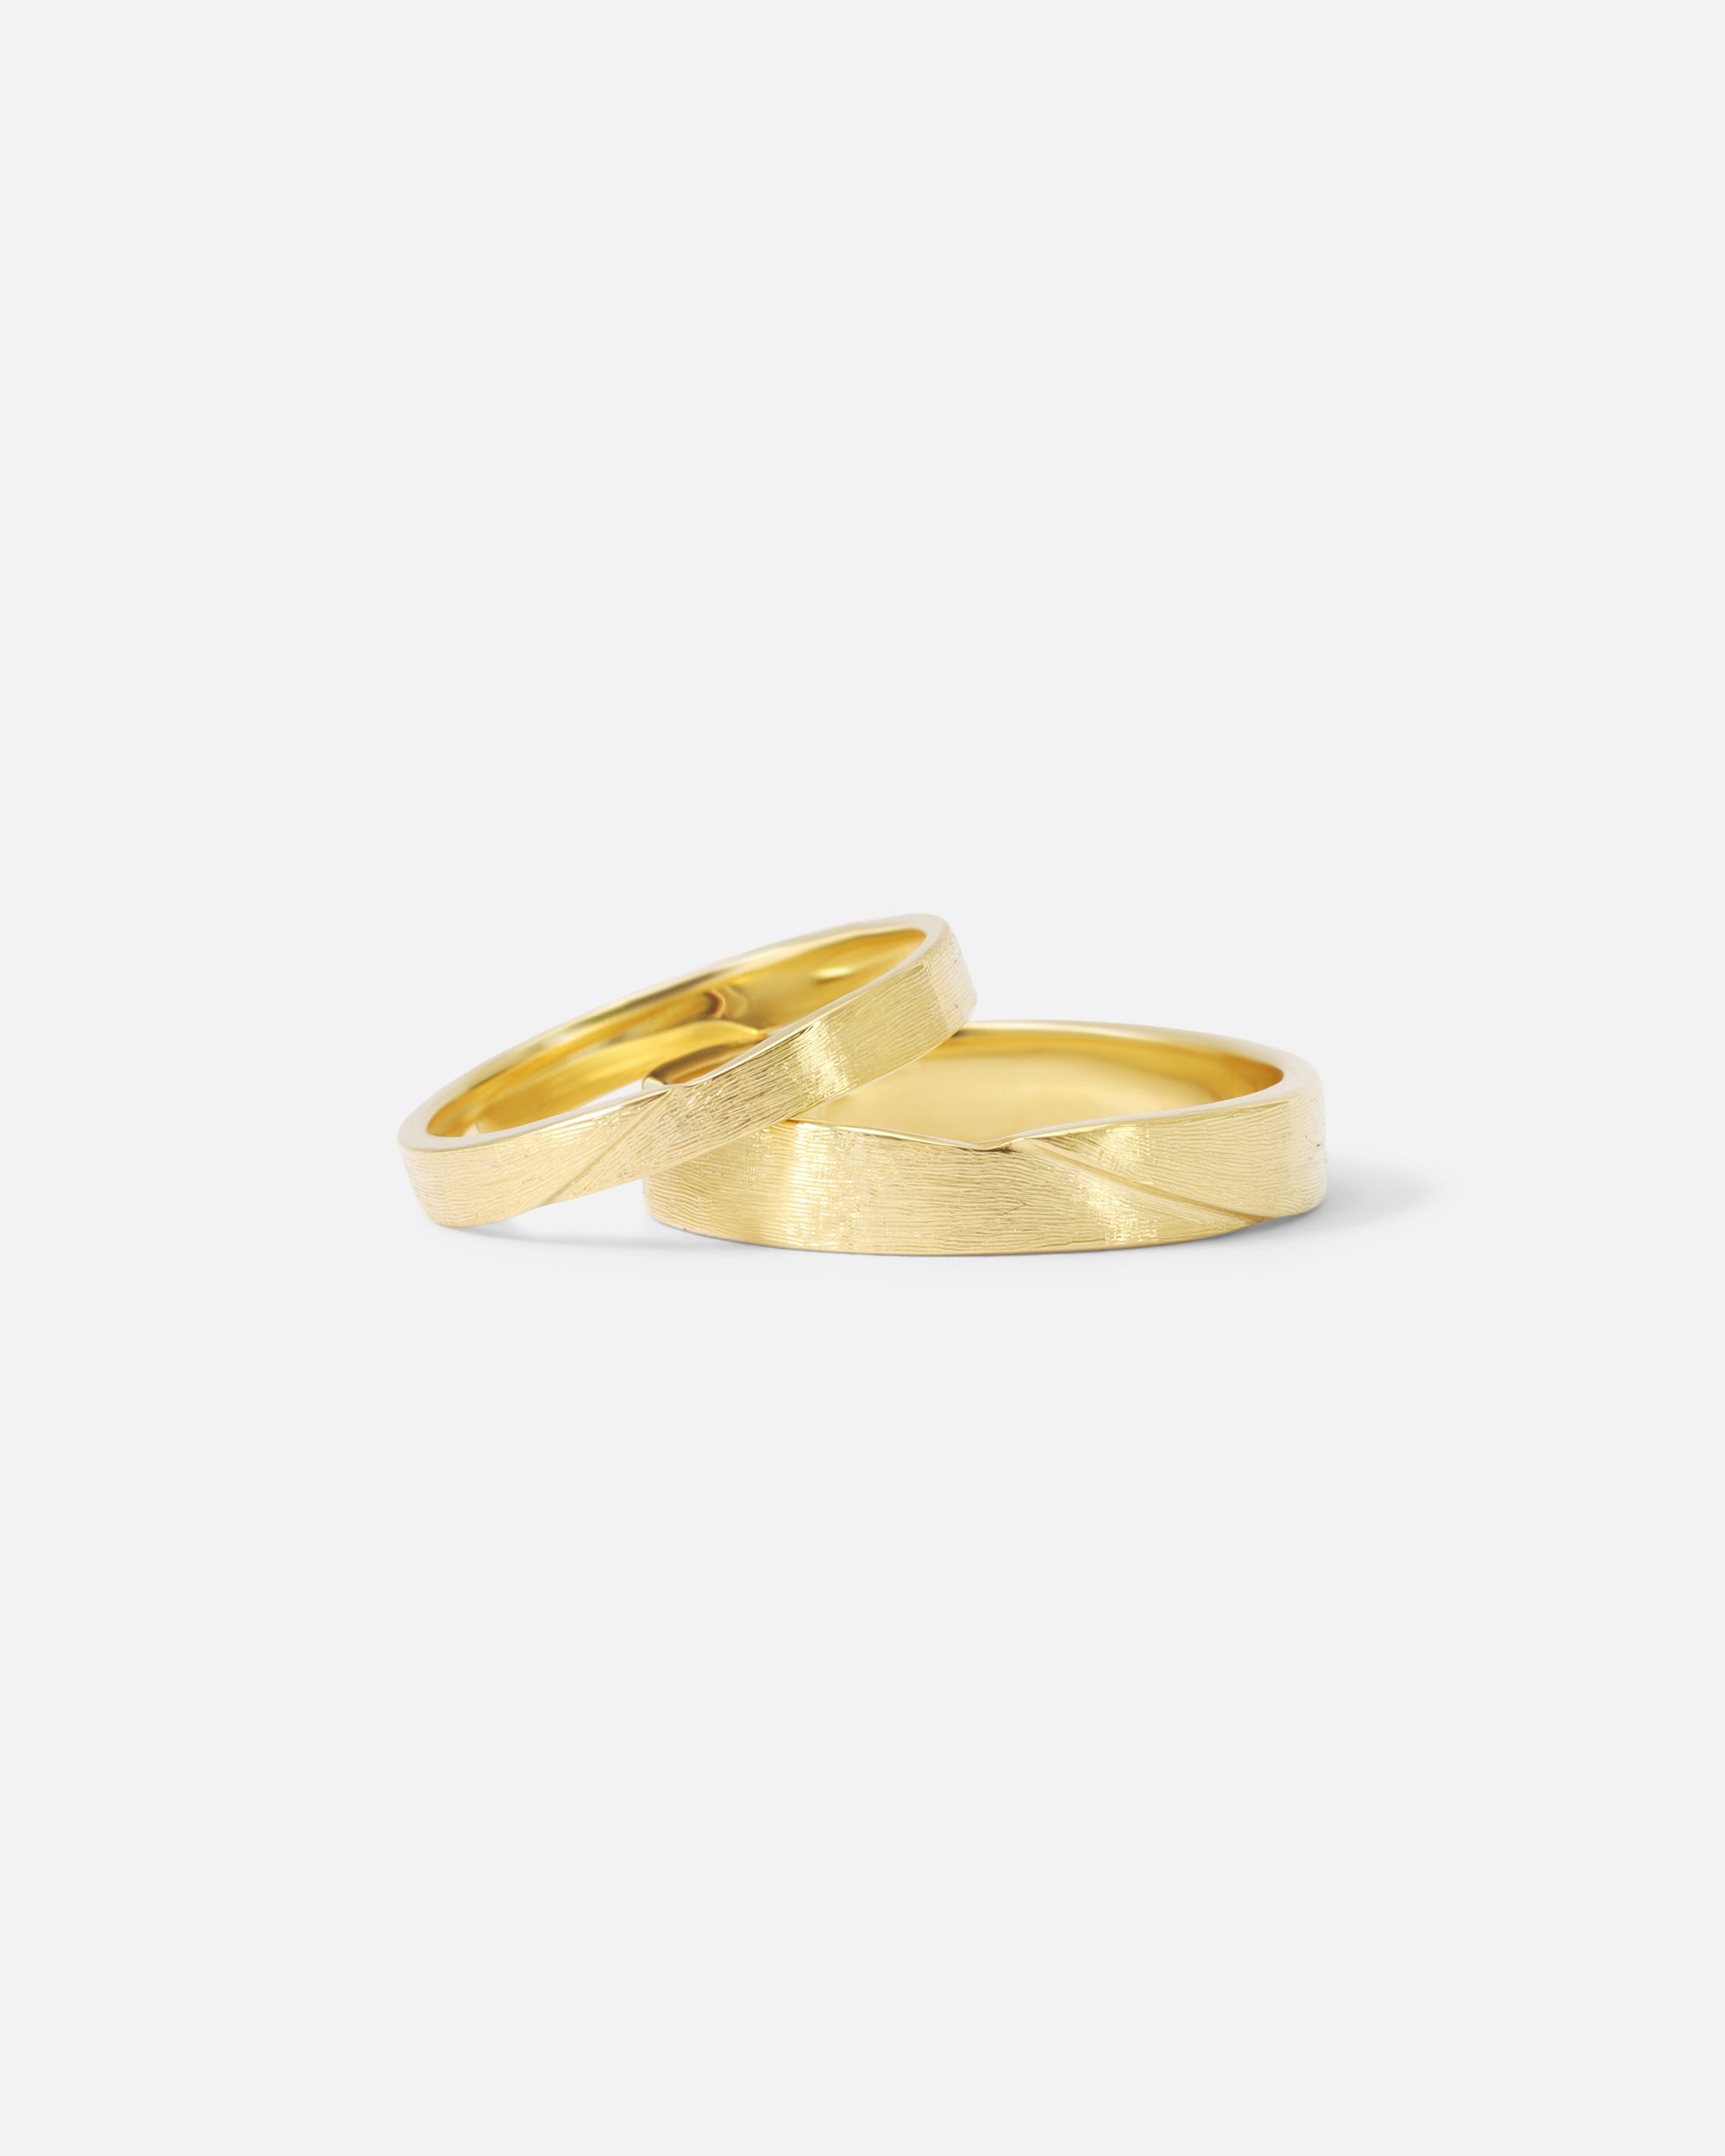 Enishi Ring / Large By Hiroyo in Wedding Bands Category